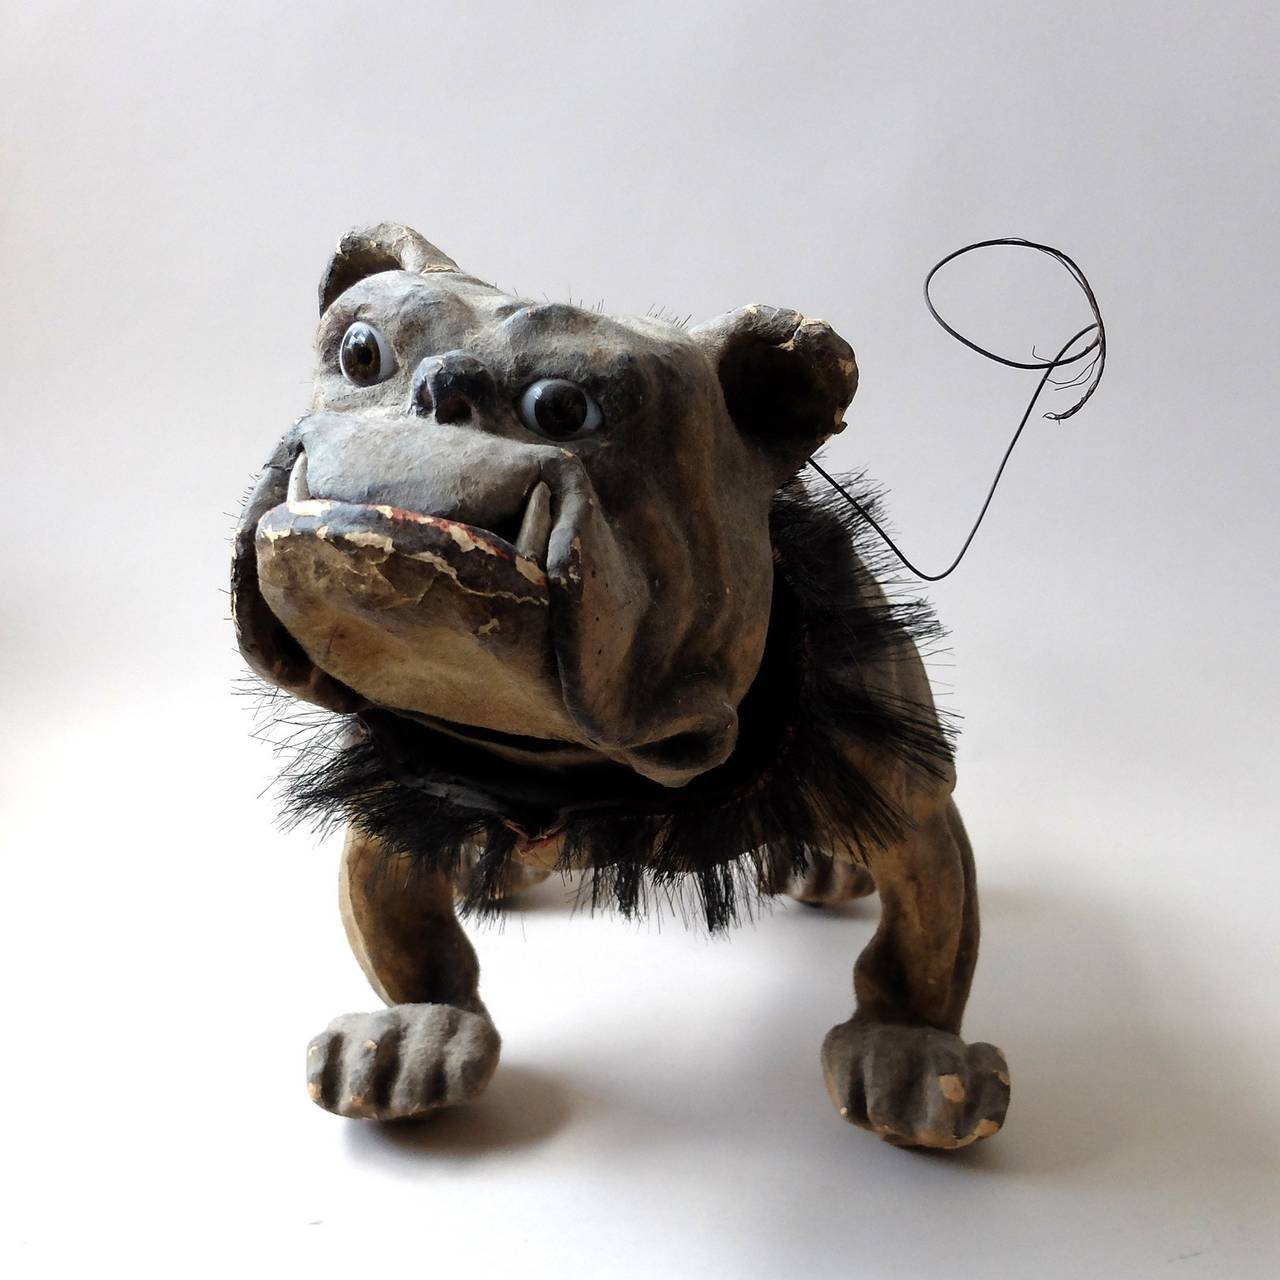 Flocked papier mâché toy bulldog, on wooden castors, with a nodding head, hair collar, glass eyes, and an articulated mouth that makes a growling noise when the lead is pulled.